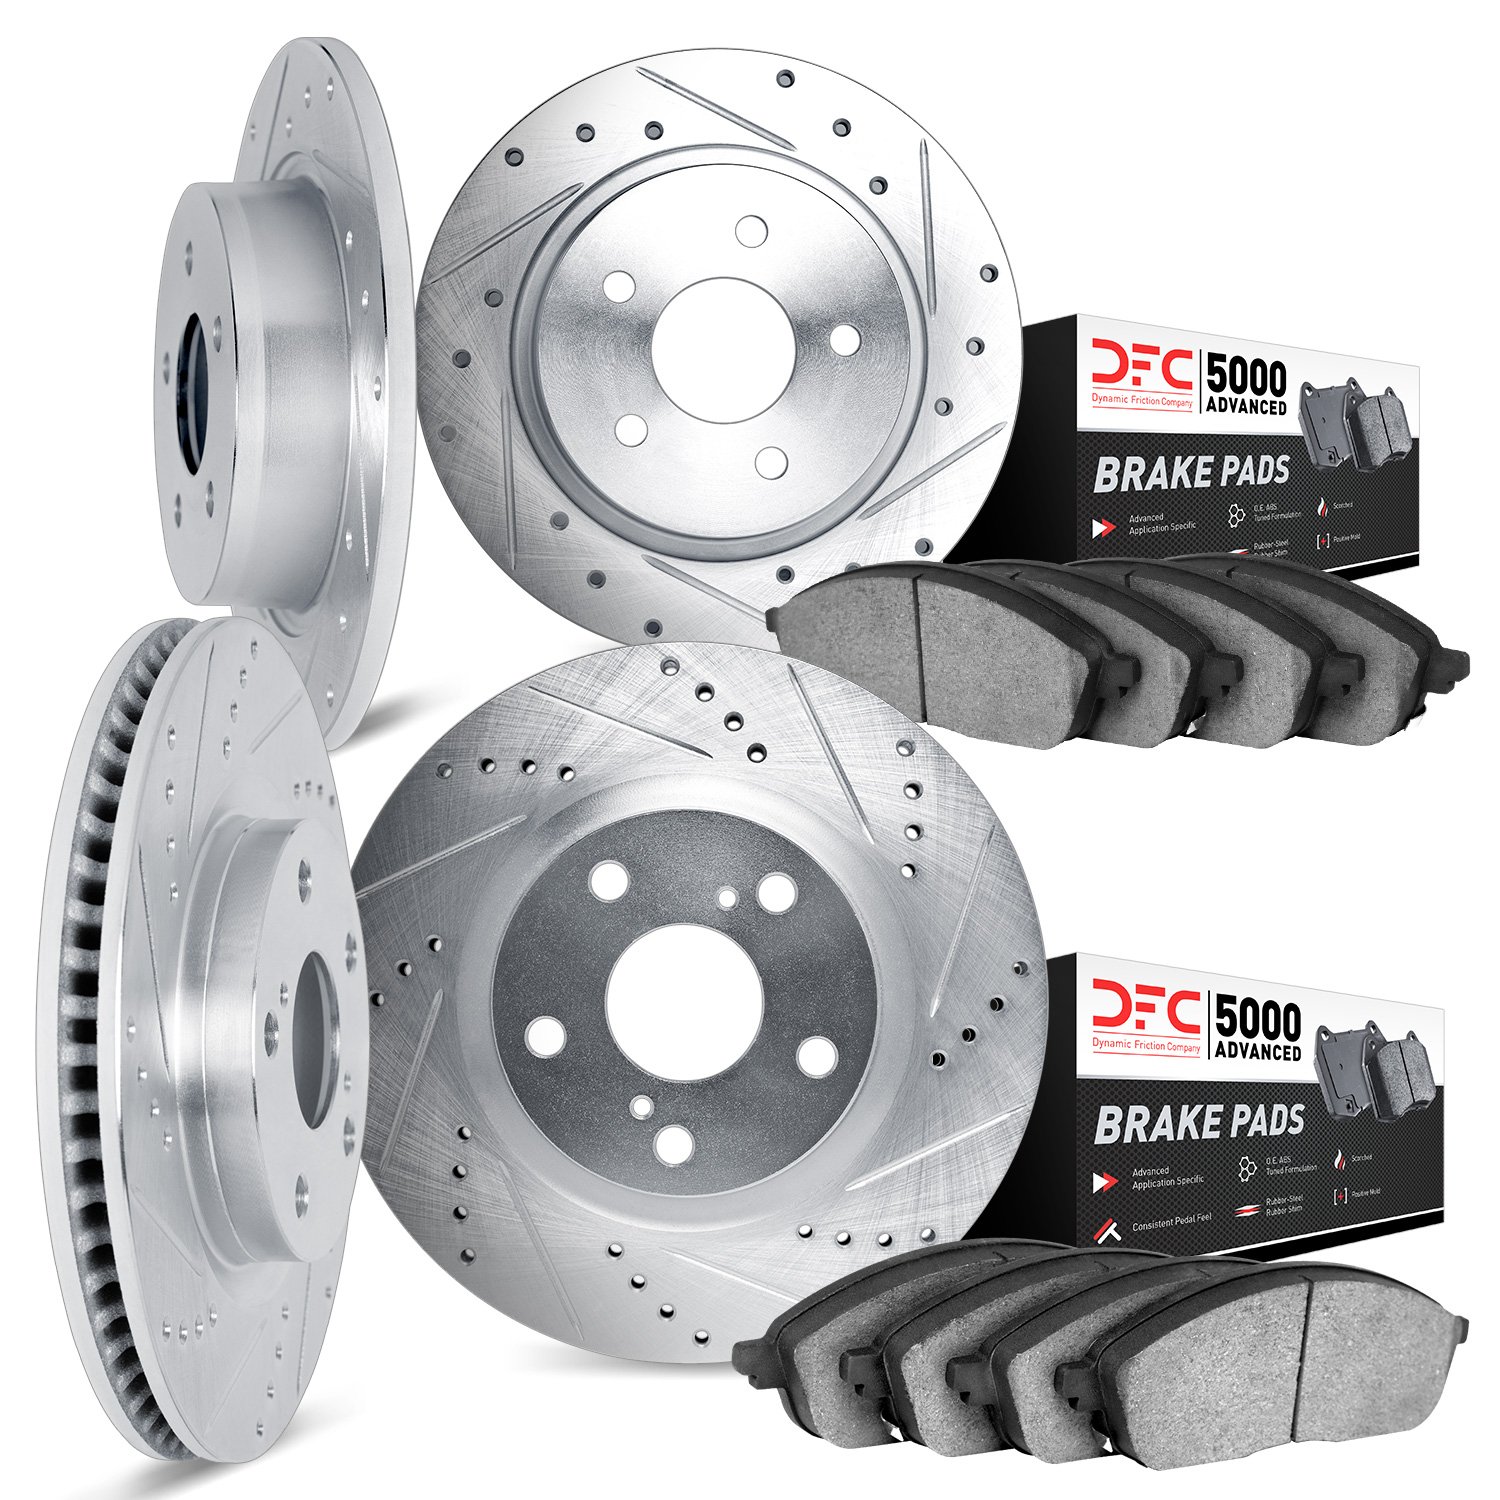 7504-67100 Drilled/Slotted Brake Rotors w/5000 Advanced Brake Pads Kit [Silver], 2010-2014 Renault, Position: Front and Rear